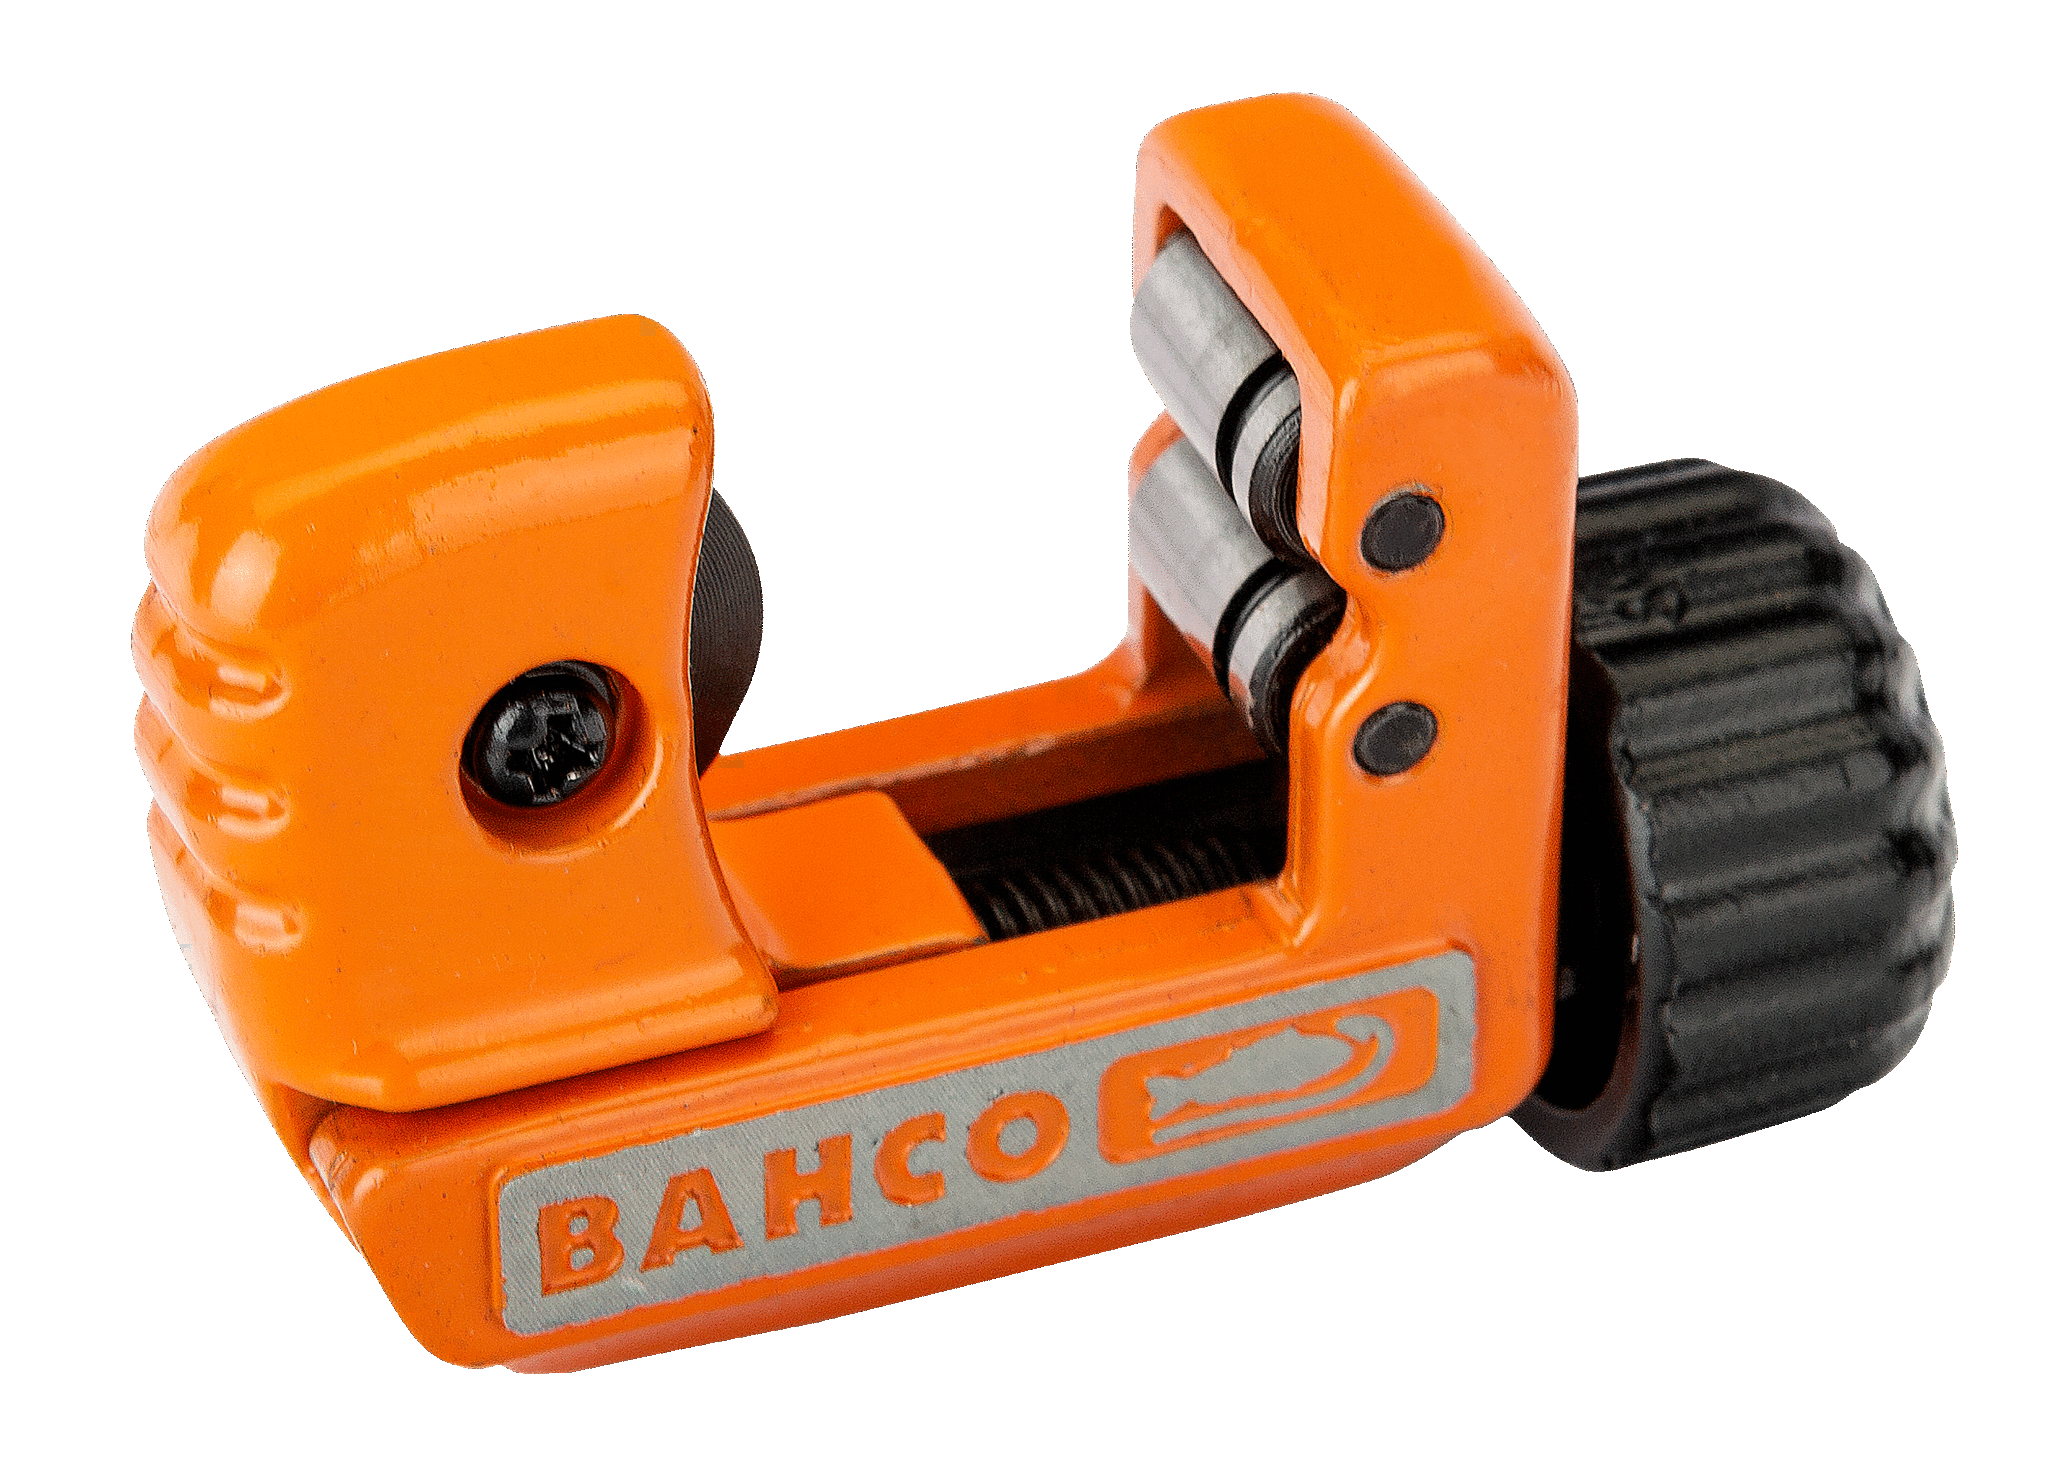 Compact Tube Cutter 3-22 mm - 301-22 by Bahco